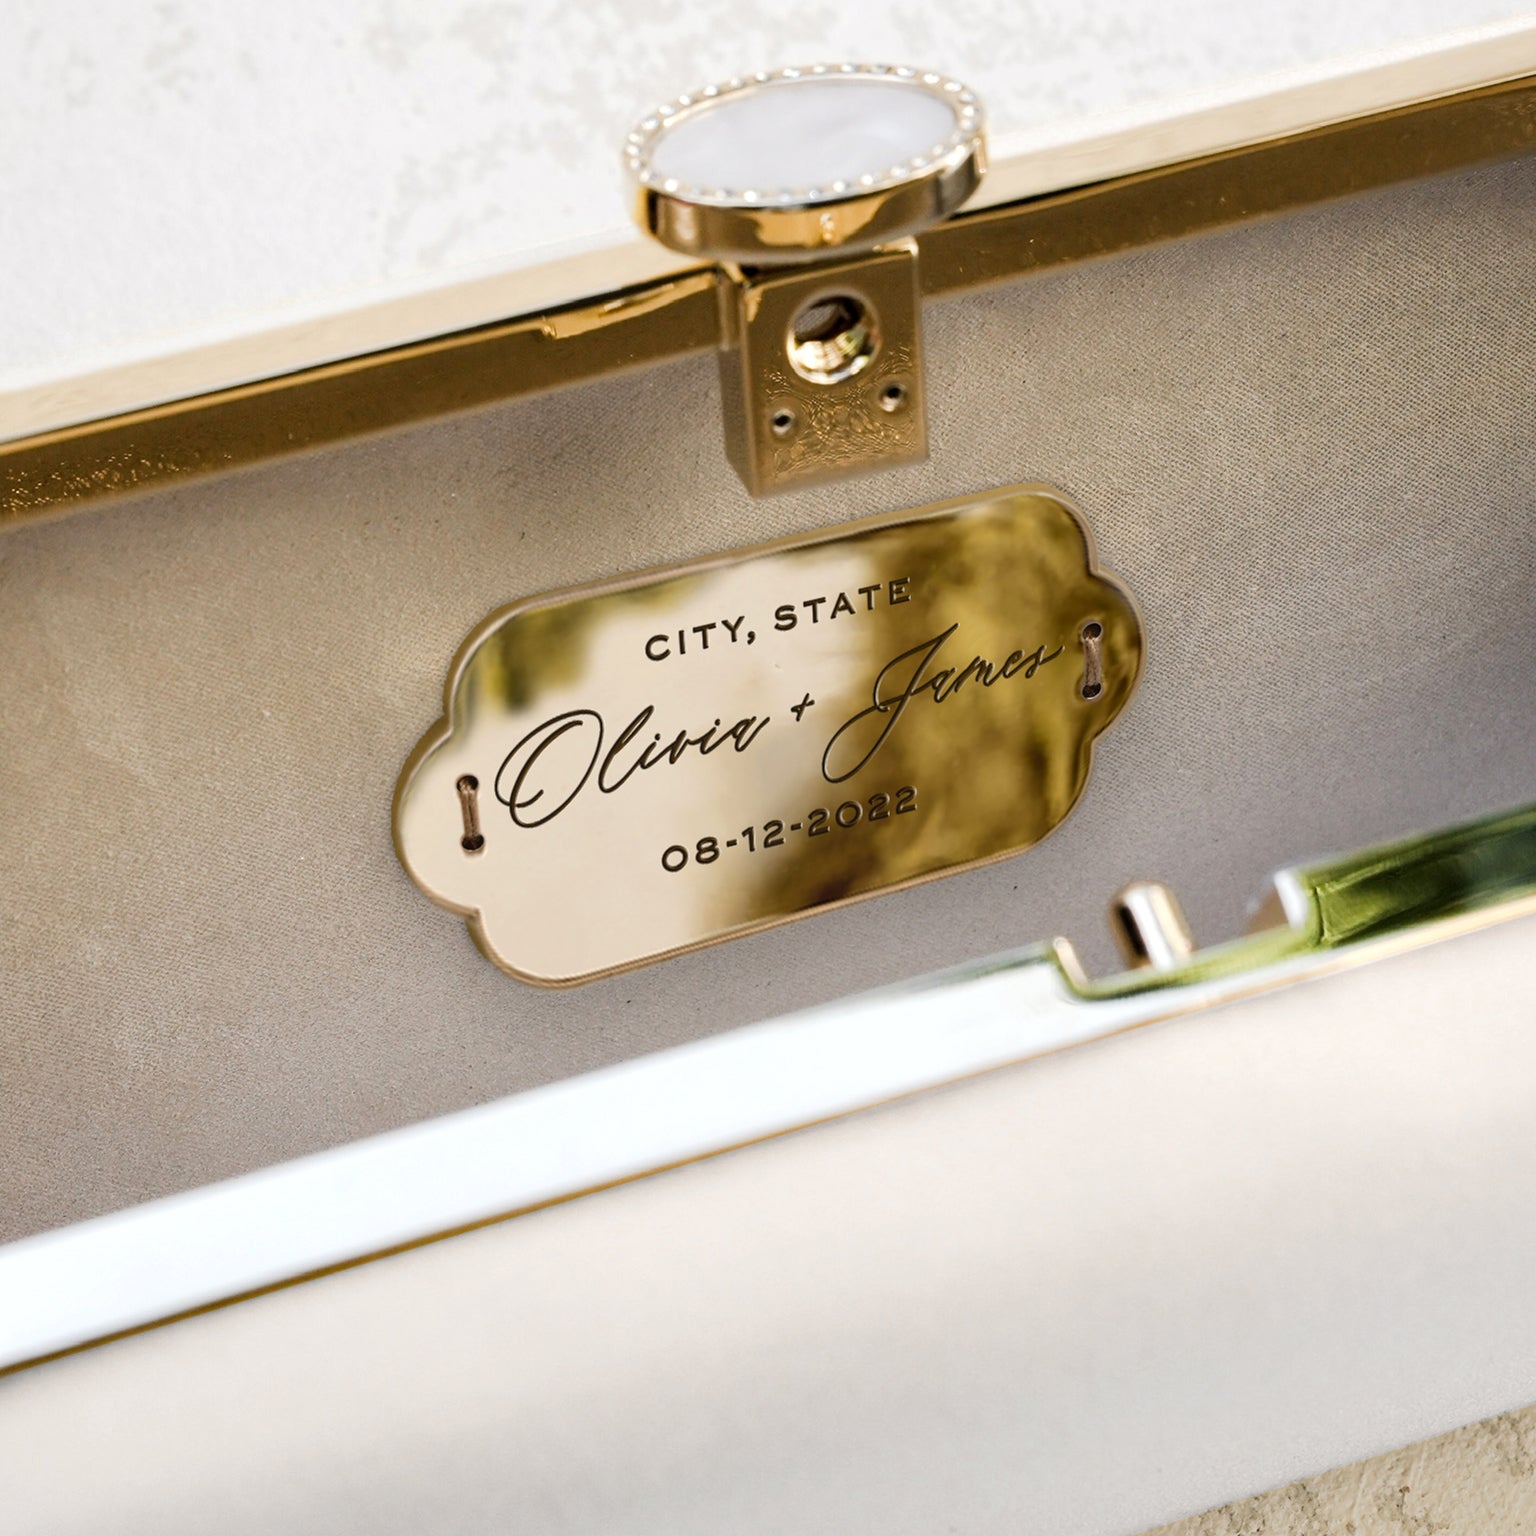 A personalized nameplate with the names &quot;oliver + james&quot; and the date &quot;08-12-2022&quot; attached to a Bella Rosa Collection Bella Fiori Clutch Ivory Clutch Petite, possibly part of a wedding item.